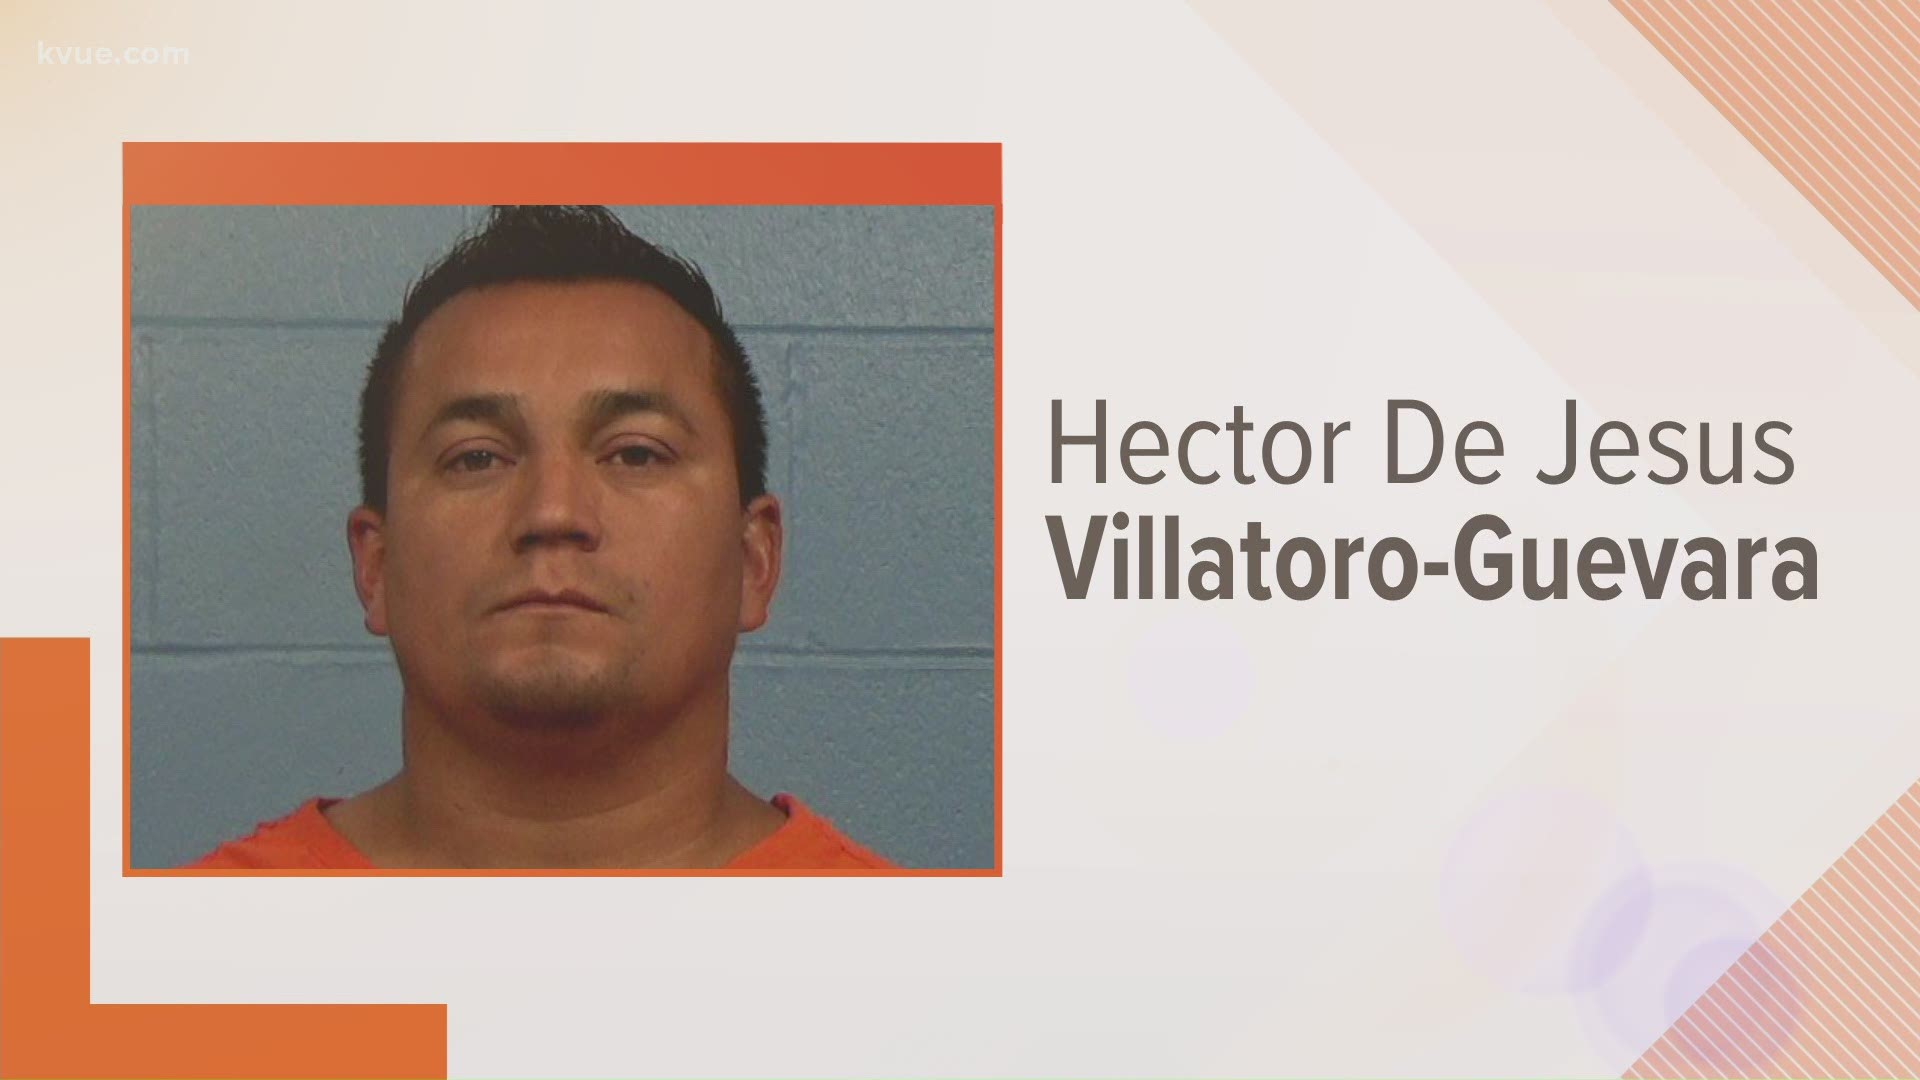 Hector De Jesus Villatoro-Guevara was arrested for the murder of Cameron Wilcox. He is accused of shooting and killing Wilcox while he was unloading groceries.